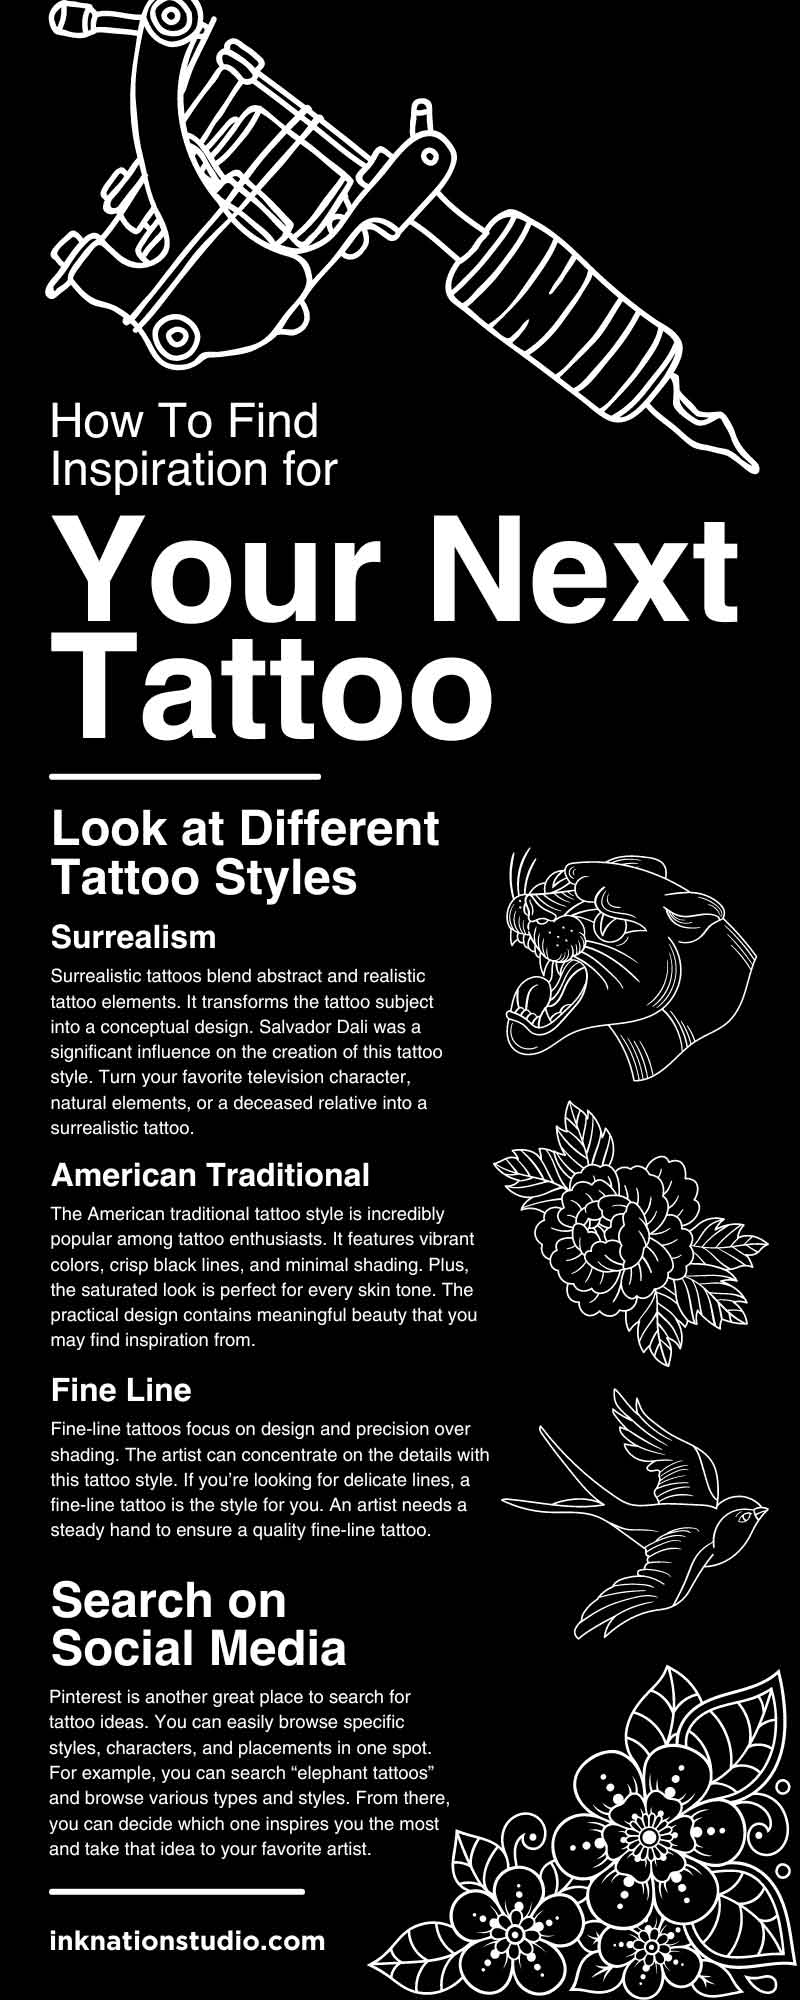 How To Find Inspiration for Your Next Tattoo